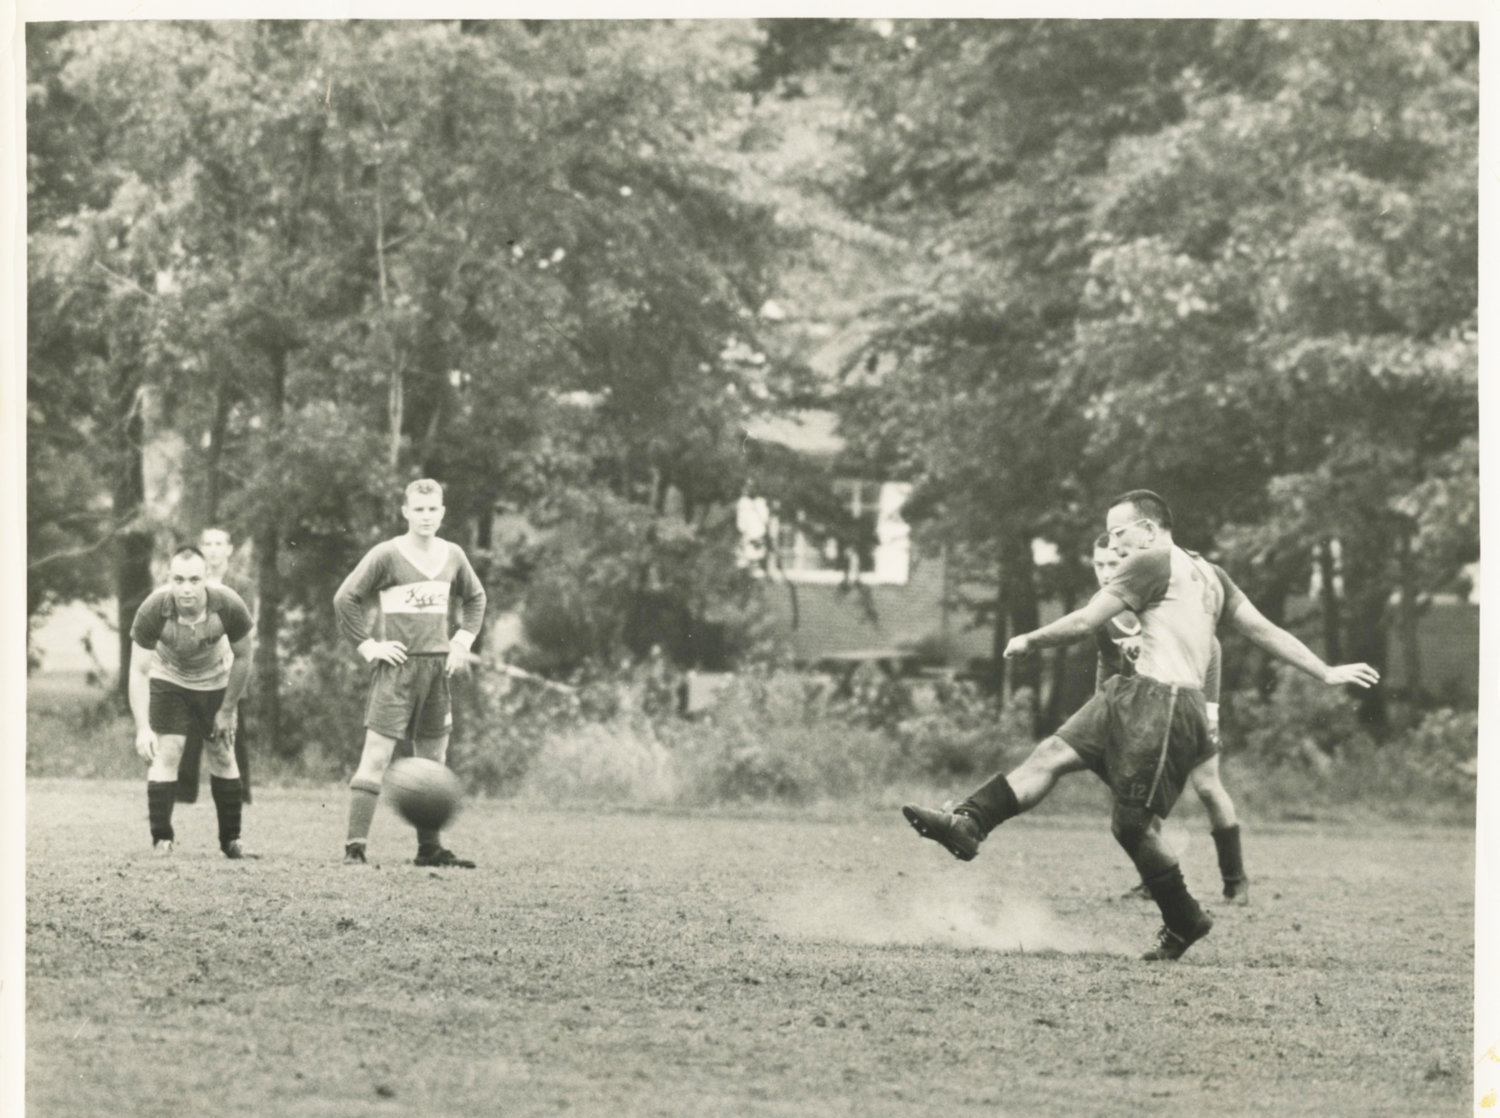 Joe Aguiar, right, graduated from Rhode Island College in 1960 and scored 34 goals in 34 career games.